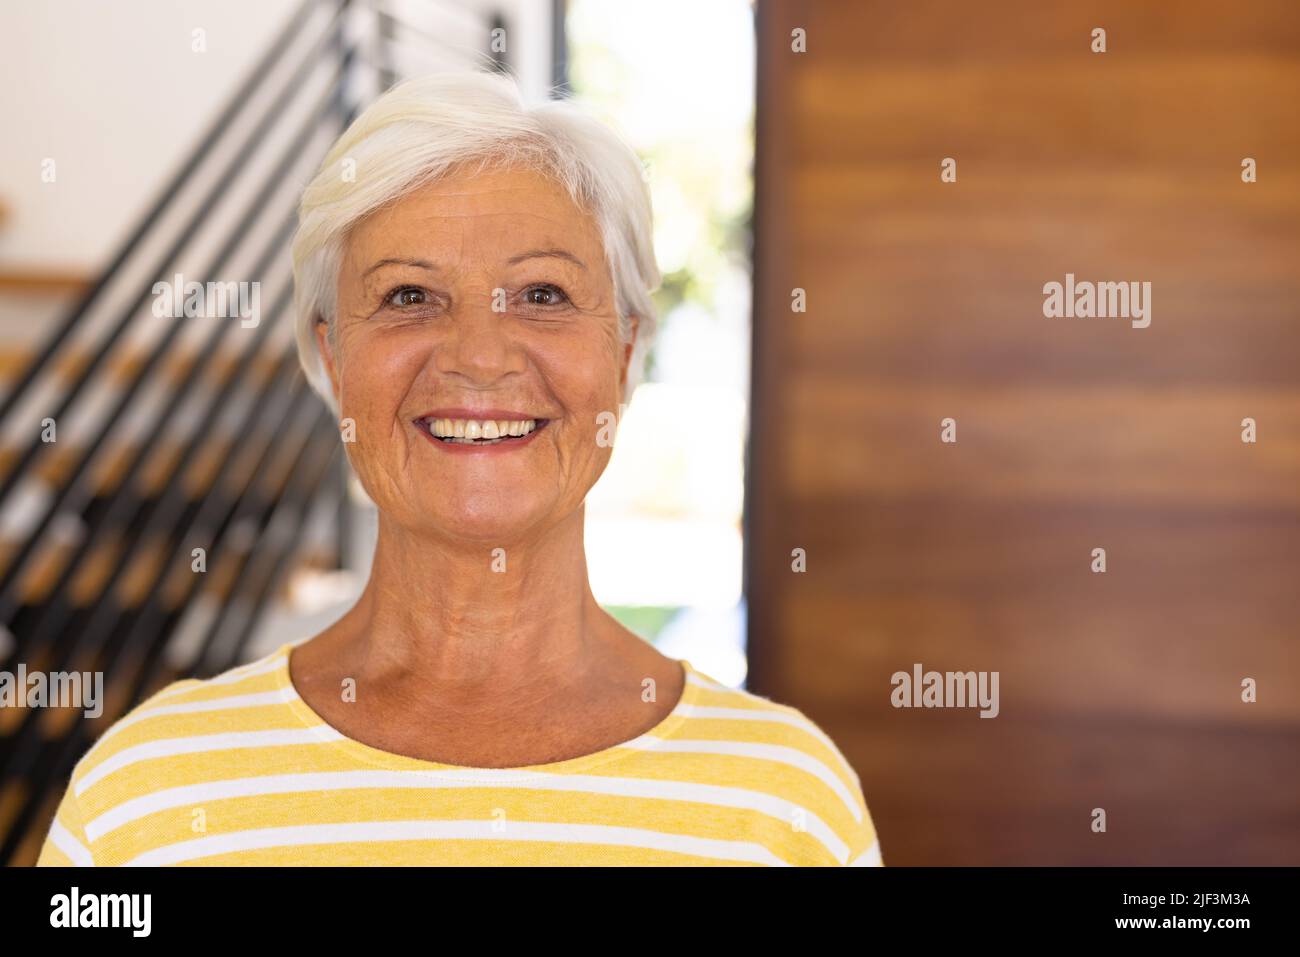 Close-up portrait of smiling biracial senior woman with short hair against door in nursing home Stock Photo